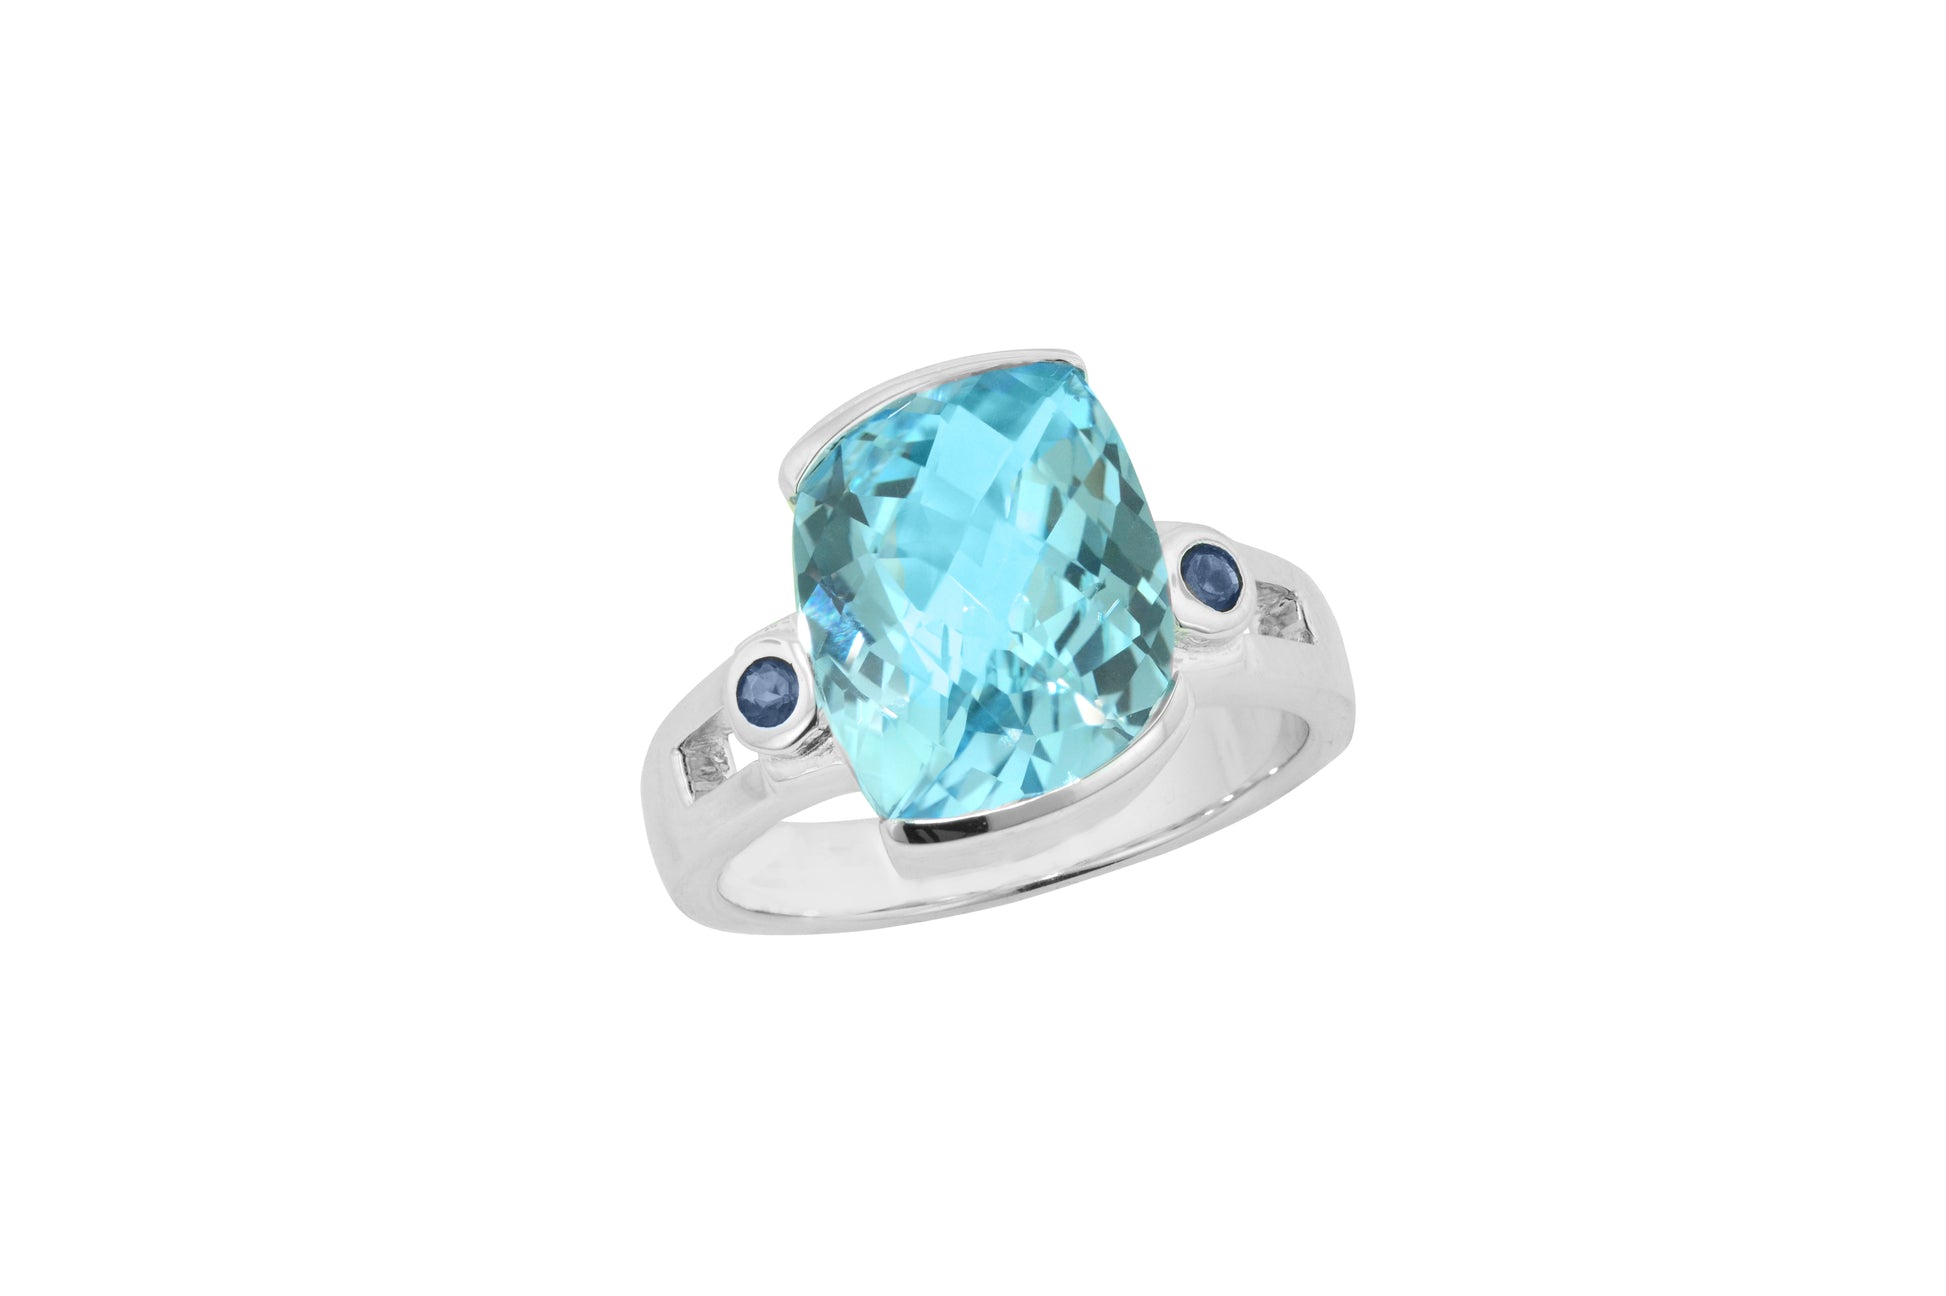 BLUE TOPAZ STERLING SILVER RING - Reigning Jewels Fine Jewelry 